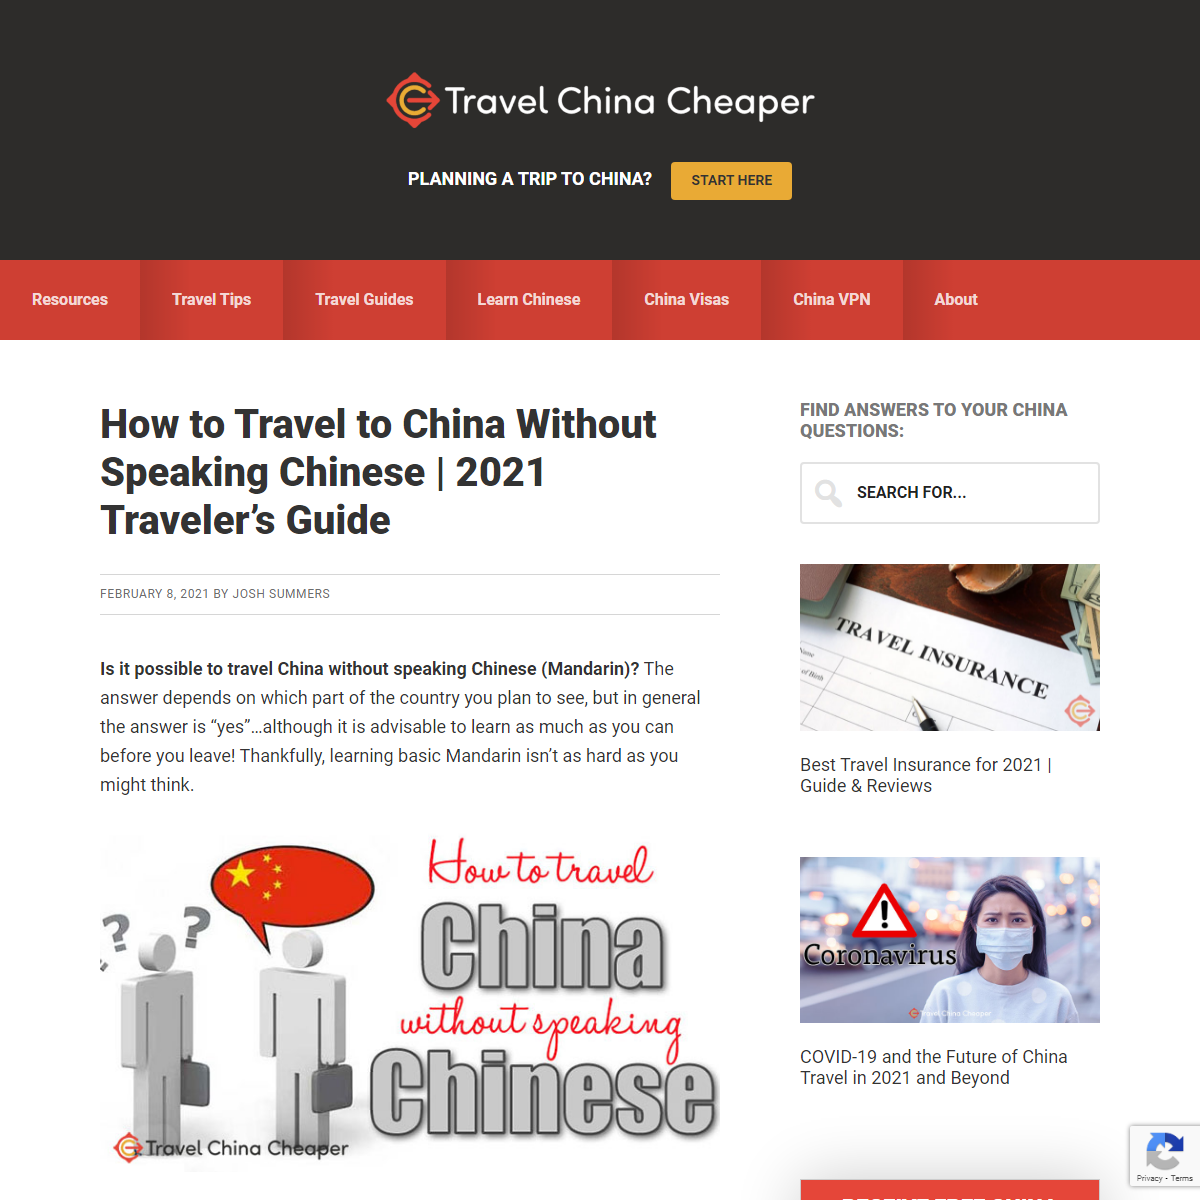 A complete backup of https://www.travelchinacheaper.com/travel-to-china-without-speaking-chinese